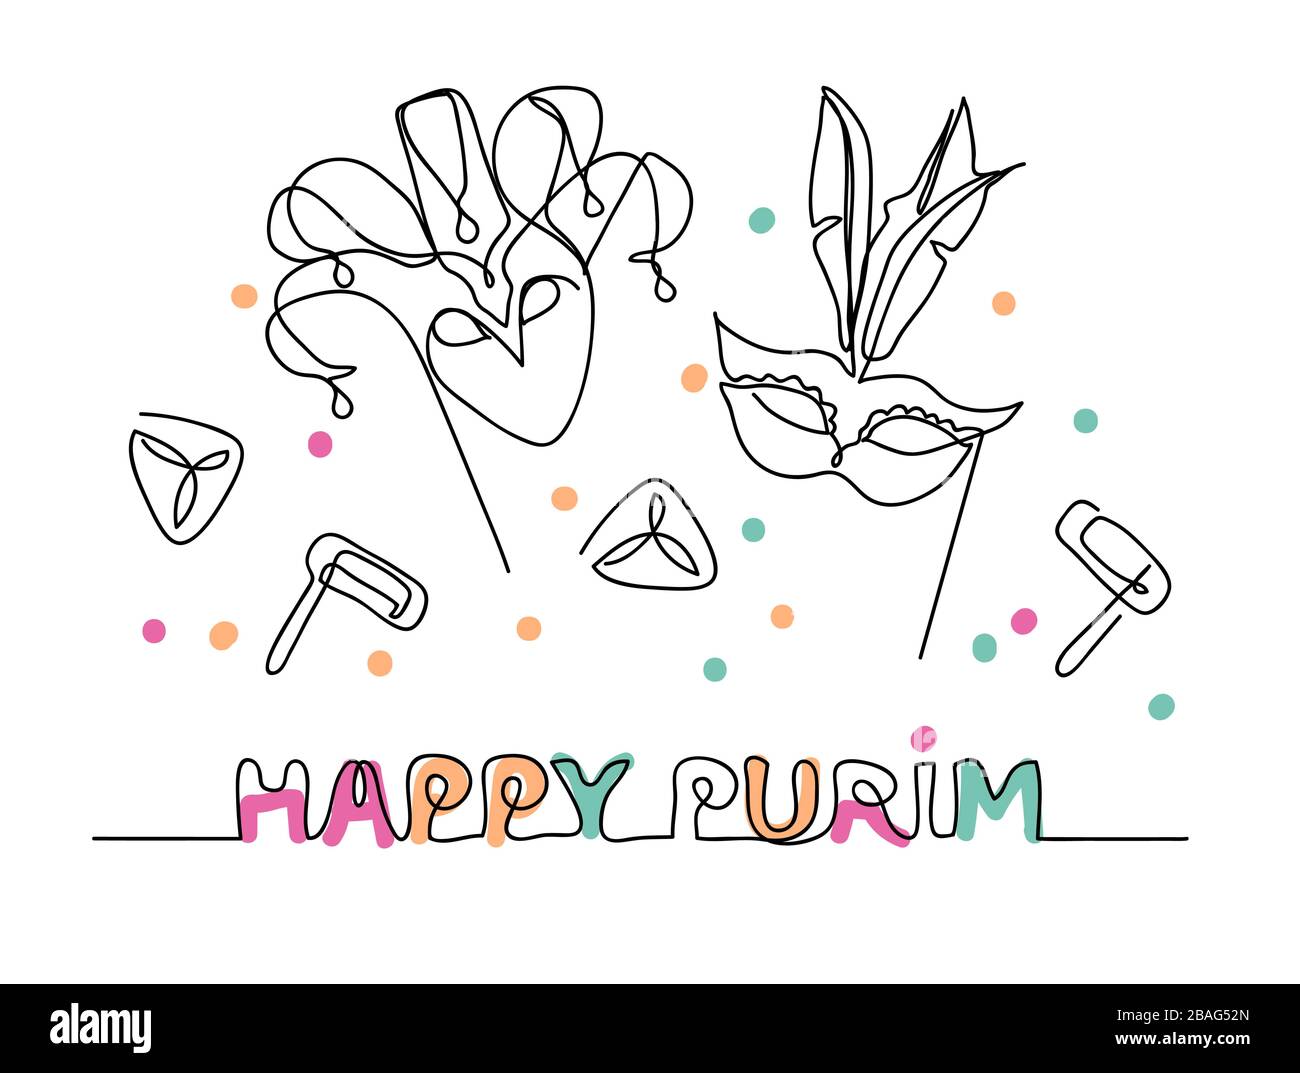 Happy Purim one line drawing Stock Vector